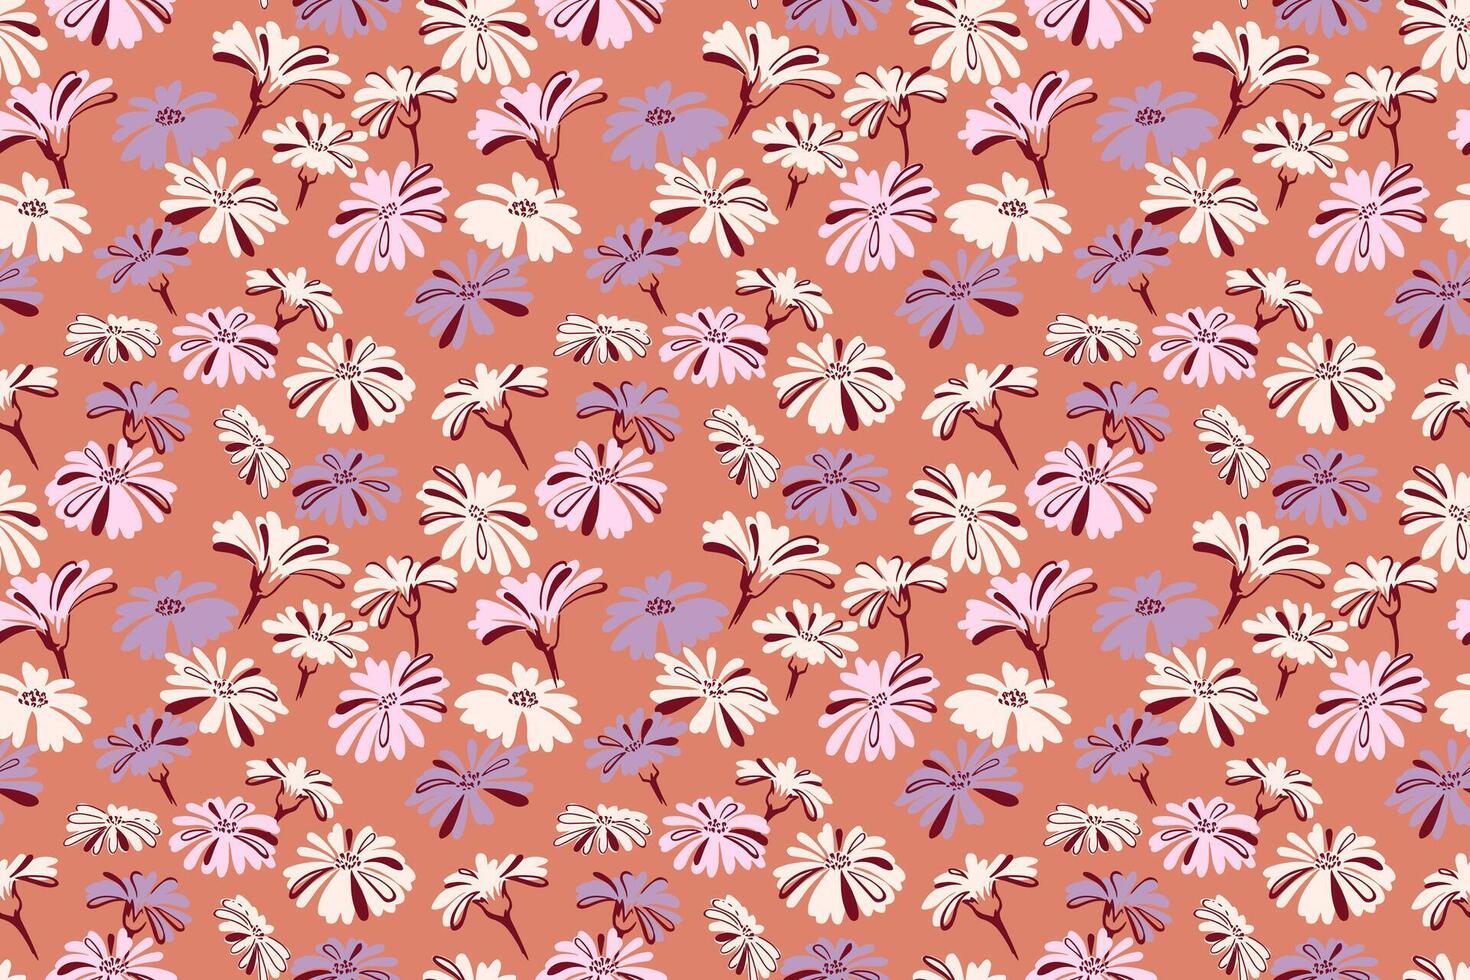 Retro pastel seamless pattern with abstract, simple floral. Vector hand drawn sketch. Ditsy flowers. Design for fashion, fabric, wallpaper.